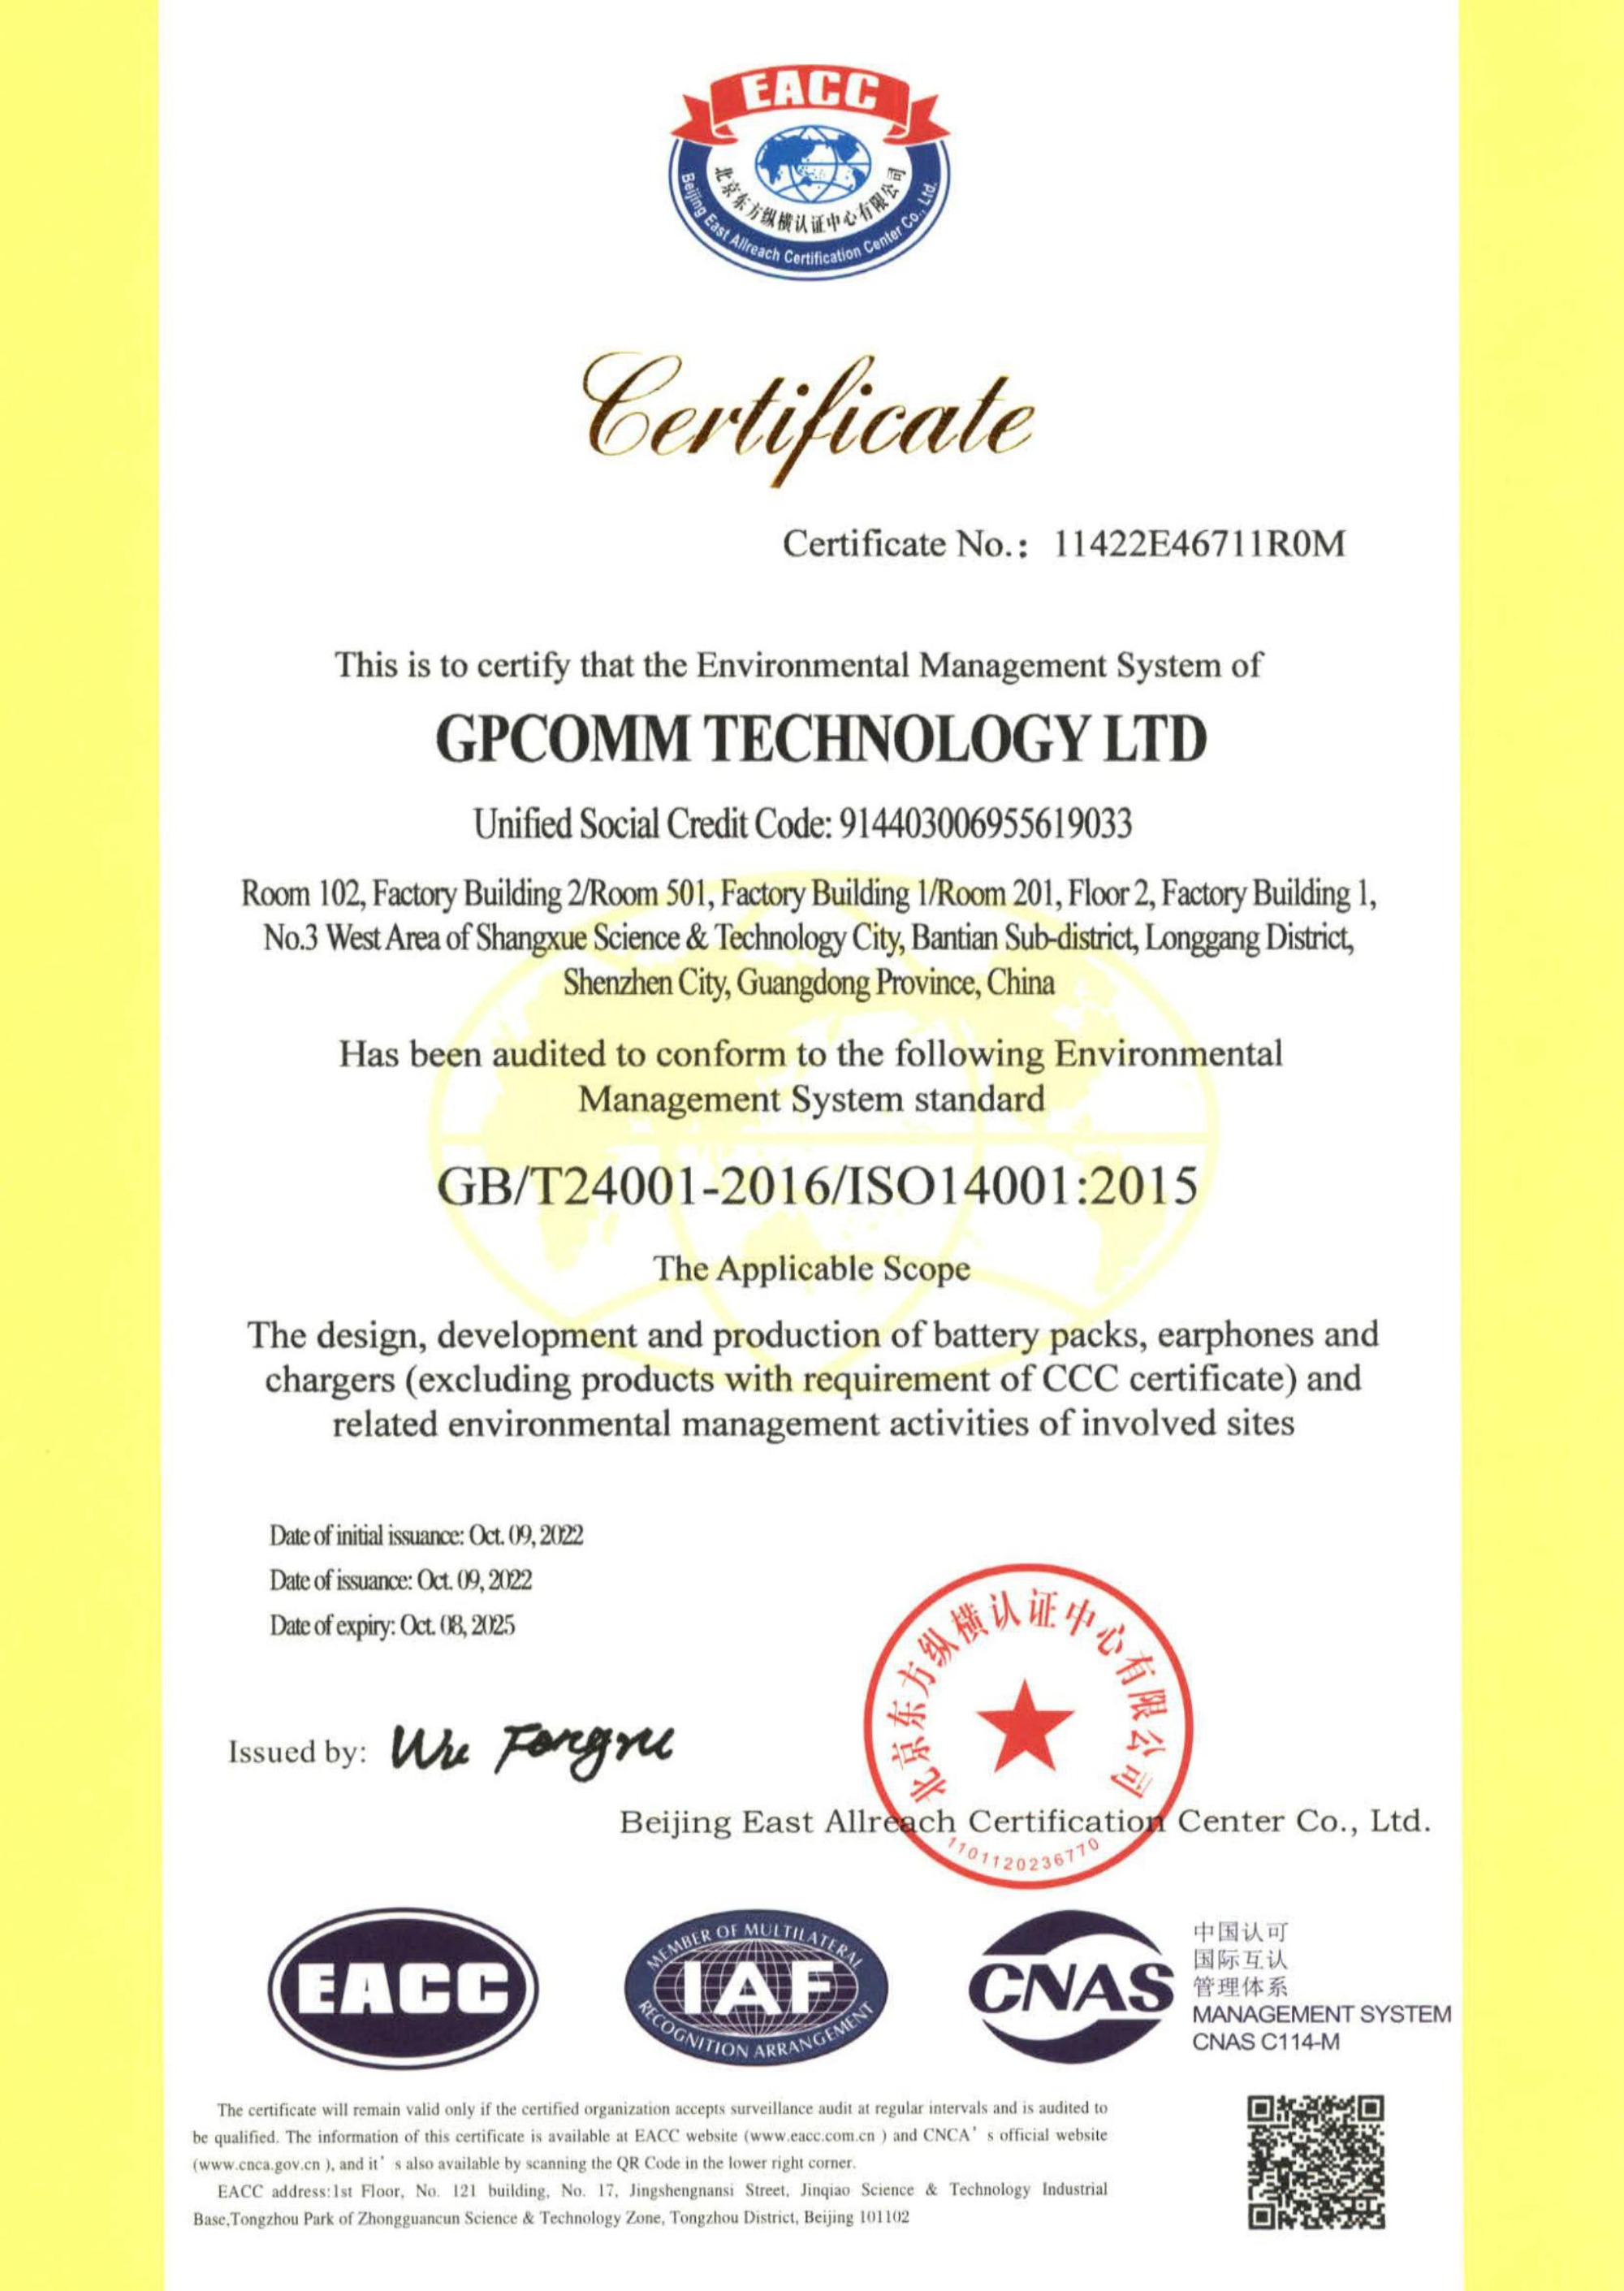 GPCOMM Achieves &quot;Environmental Management System-GB/T24001-2016/ISO14001:2015 Certificate&quot;